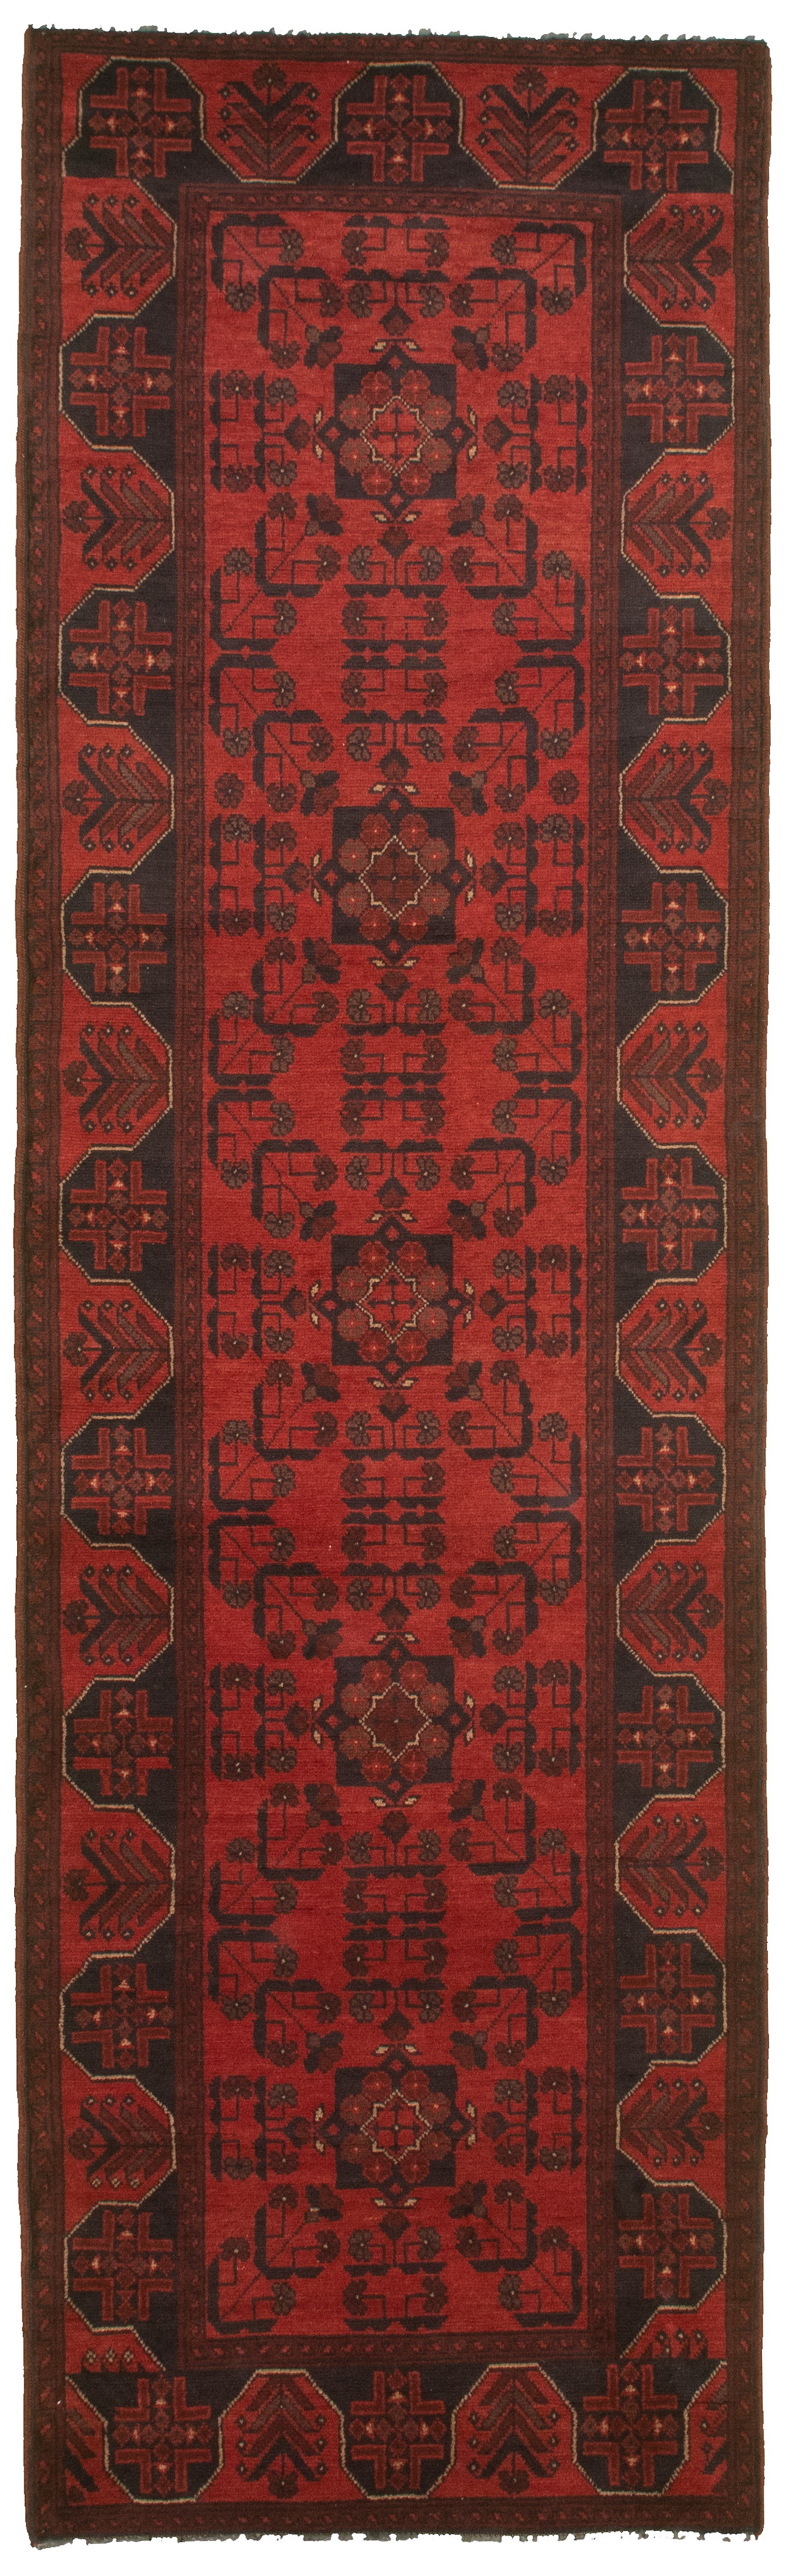 Hand-knotted Finest Khal Mohammadi Red  Rug 2'9" x 9'8" Size: 2'9" x 9'8"  